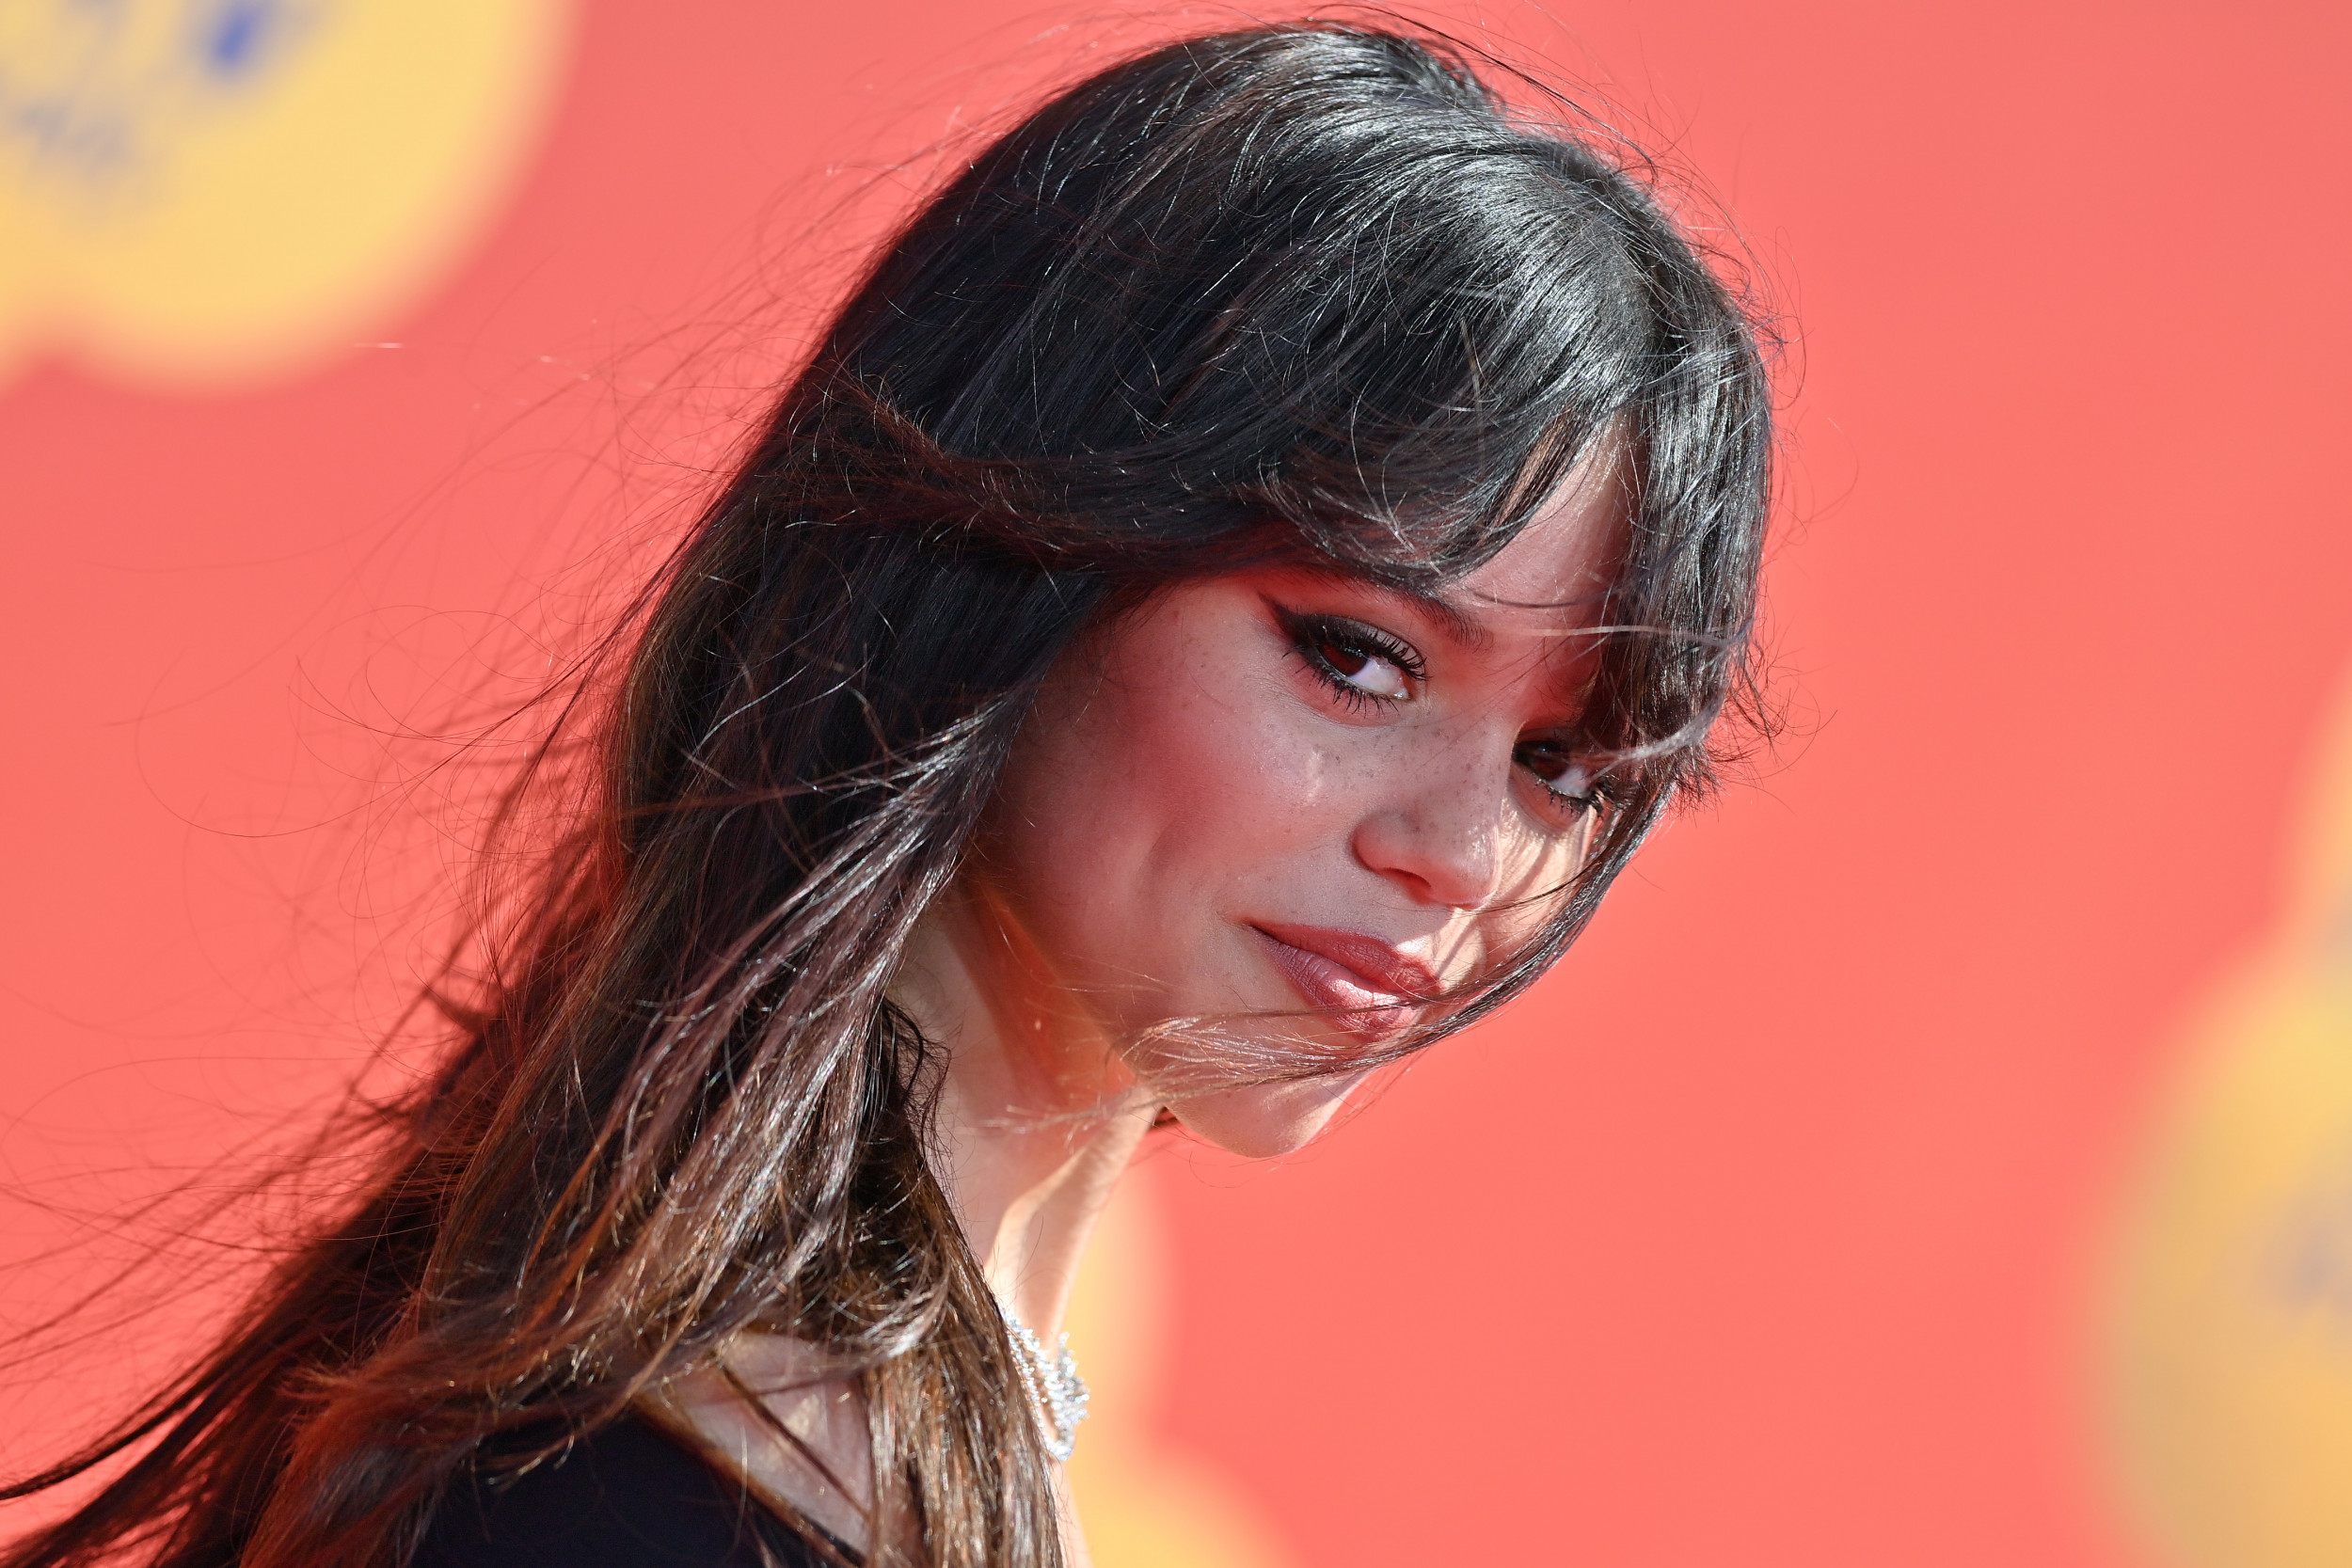 Who Is Jenna Ortega? Everything You Need to Know About the 'Wednesday' Star